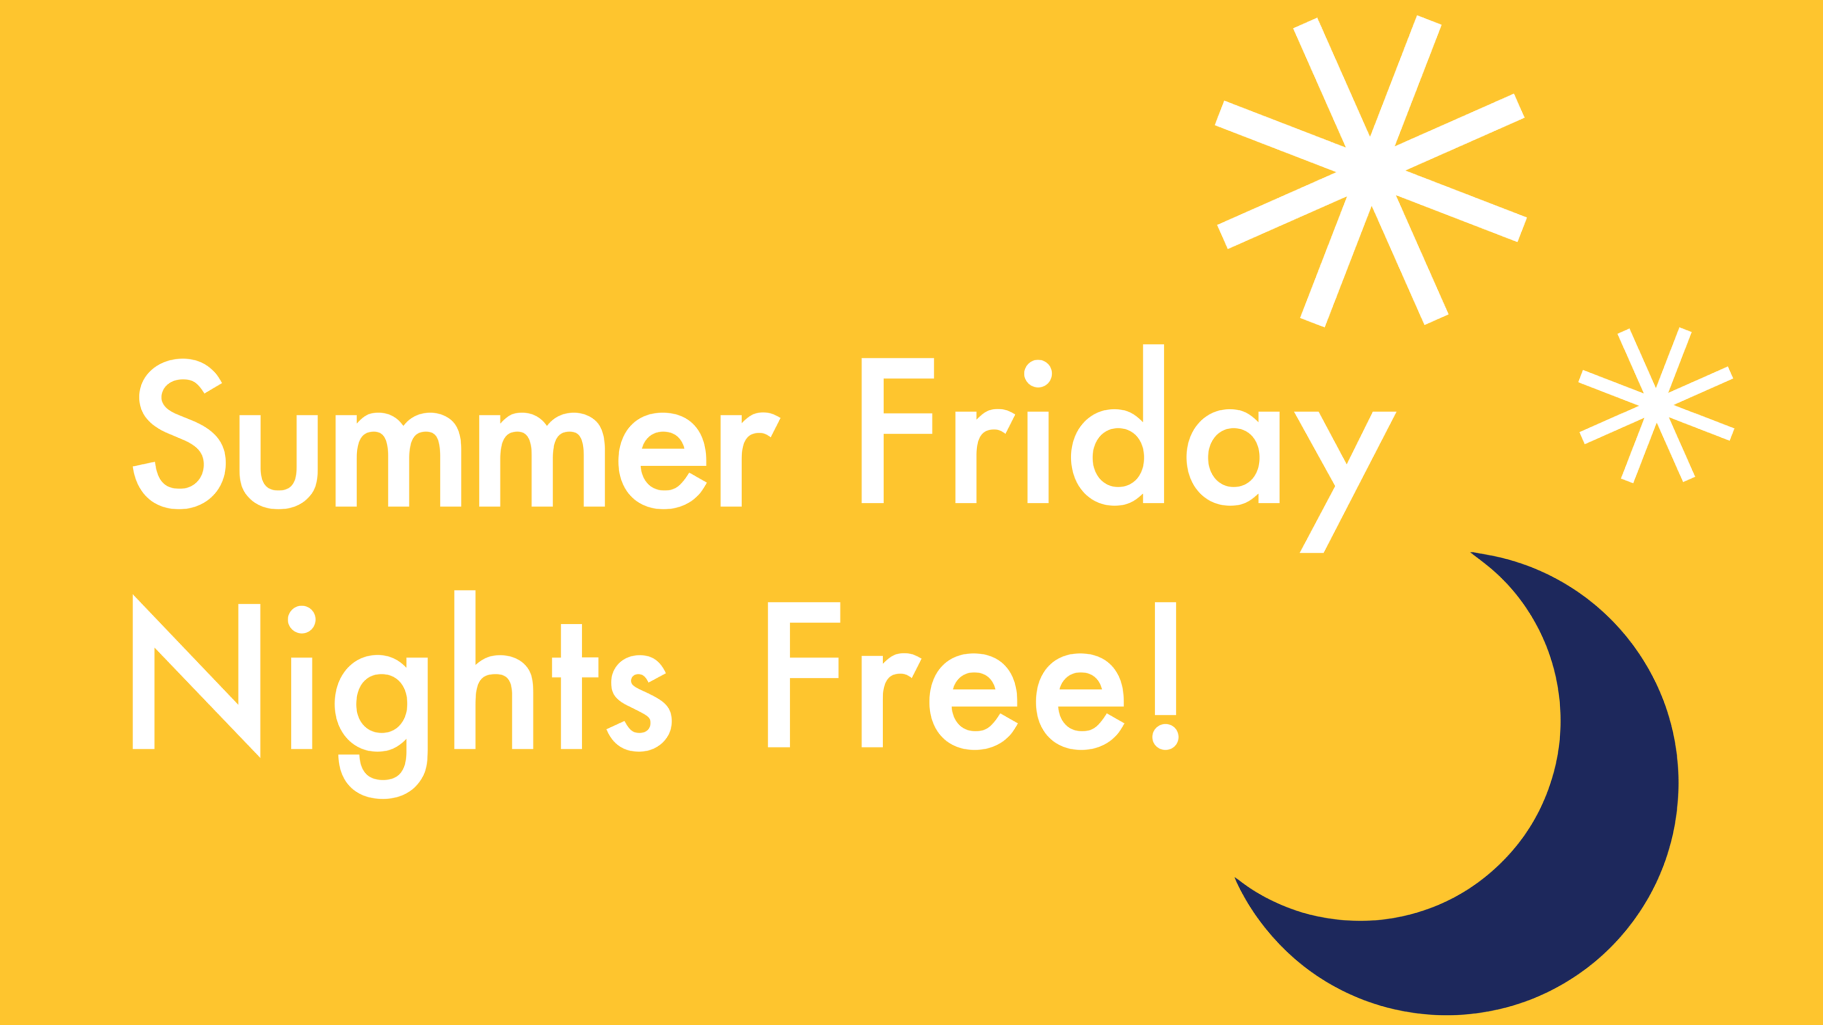 graphic logo that says, "Summer Friday Nights Free!"